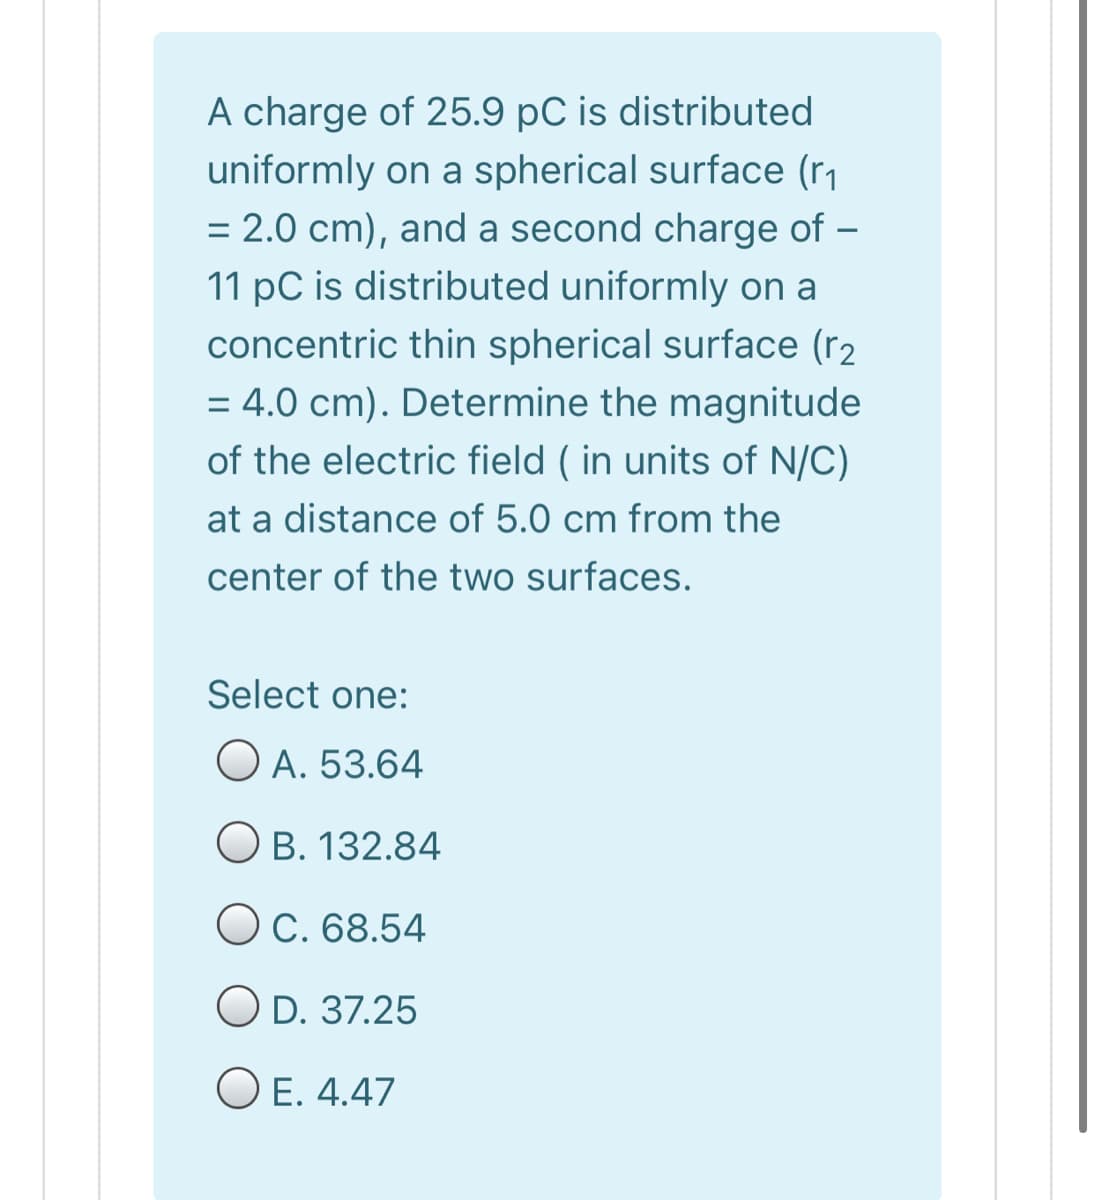 A charge of 25.9 pC is distributed
uniformly on a spherical surface (r1
= 2.0 cm), and a second charge of –
11 pC is distributed uniformly on a
concentric thin spherical surface (r2
= 4.0 cm). Determine the magnitude
%3D
of the electric field ( in units of N/C)
at a distance of 5.0 cm from the
center of the two surfaces.
Select one:
O A. 53.64
O B. 132.84
O C. 68.54
O D. 37.25
O E. 4.47
